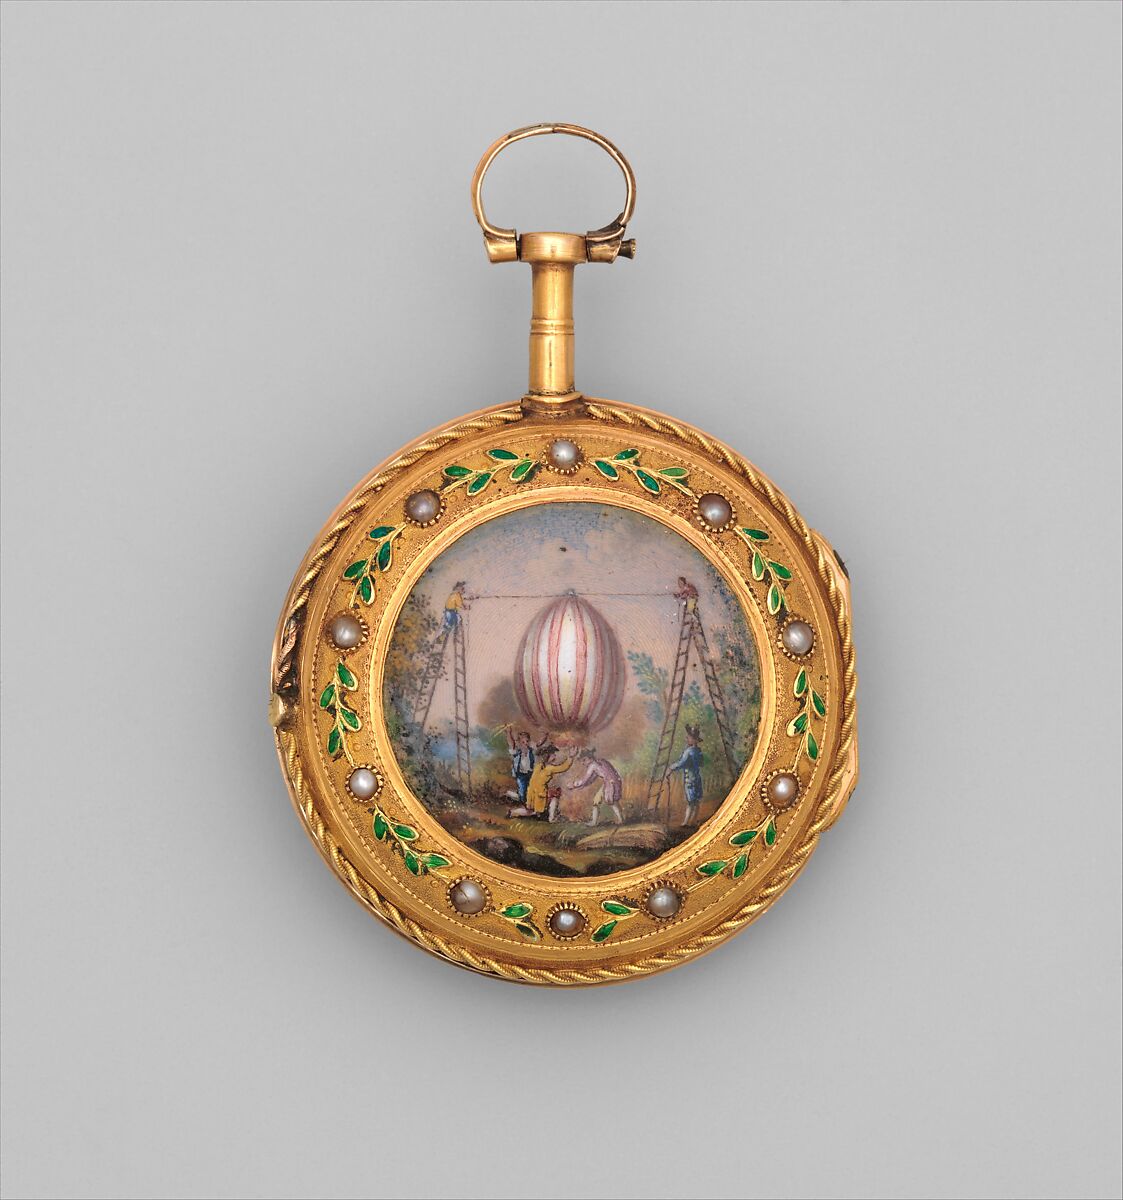 Watch, Watchmaker: Daniel Vauchez (French, born 1716, active 1767–90), Case: partly enameled gold set with pearls, gold bezel with diamonds set in silver; Dial: white enamel with openwork brass hands; Movement: brass and steel, French, Paris 